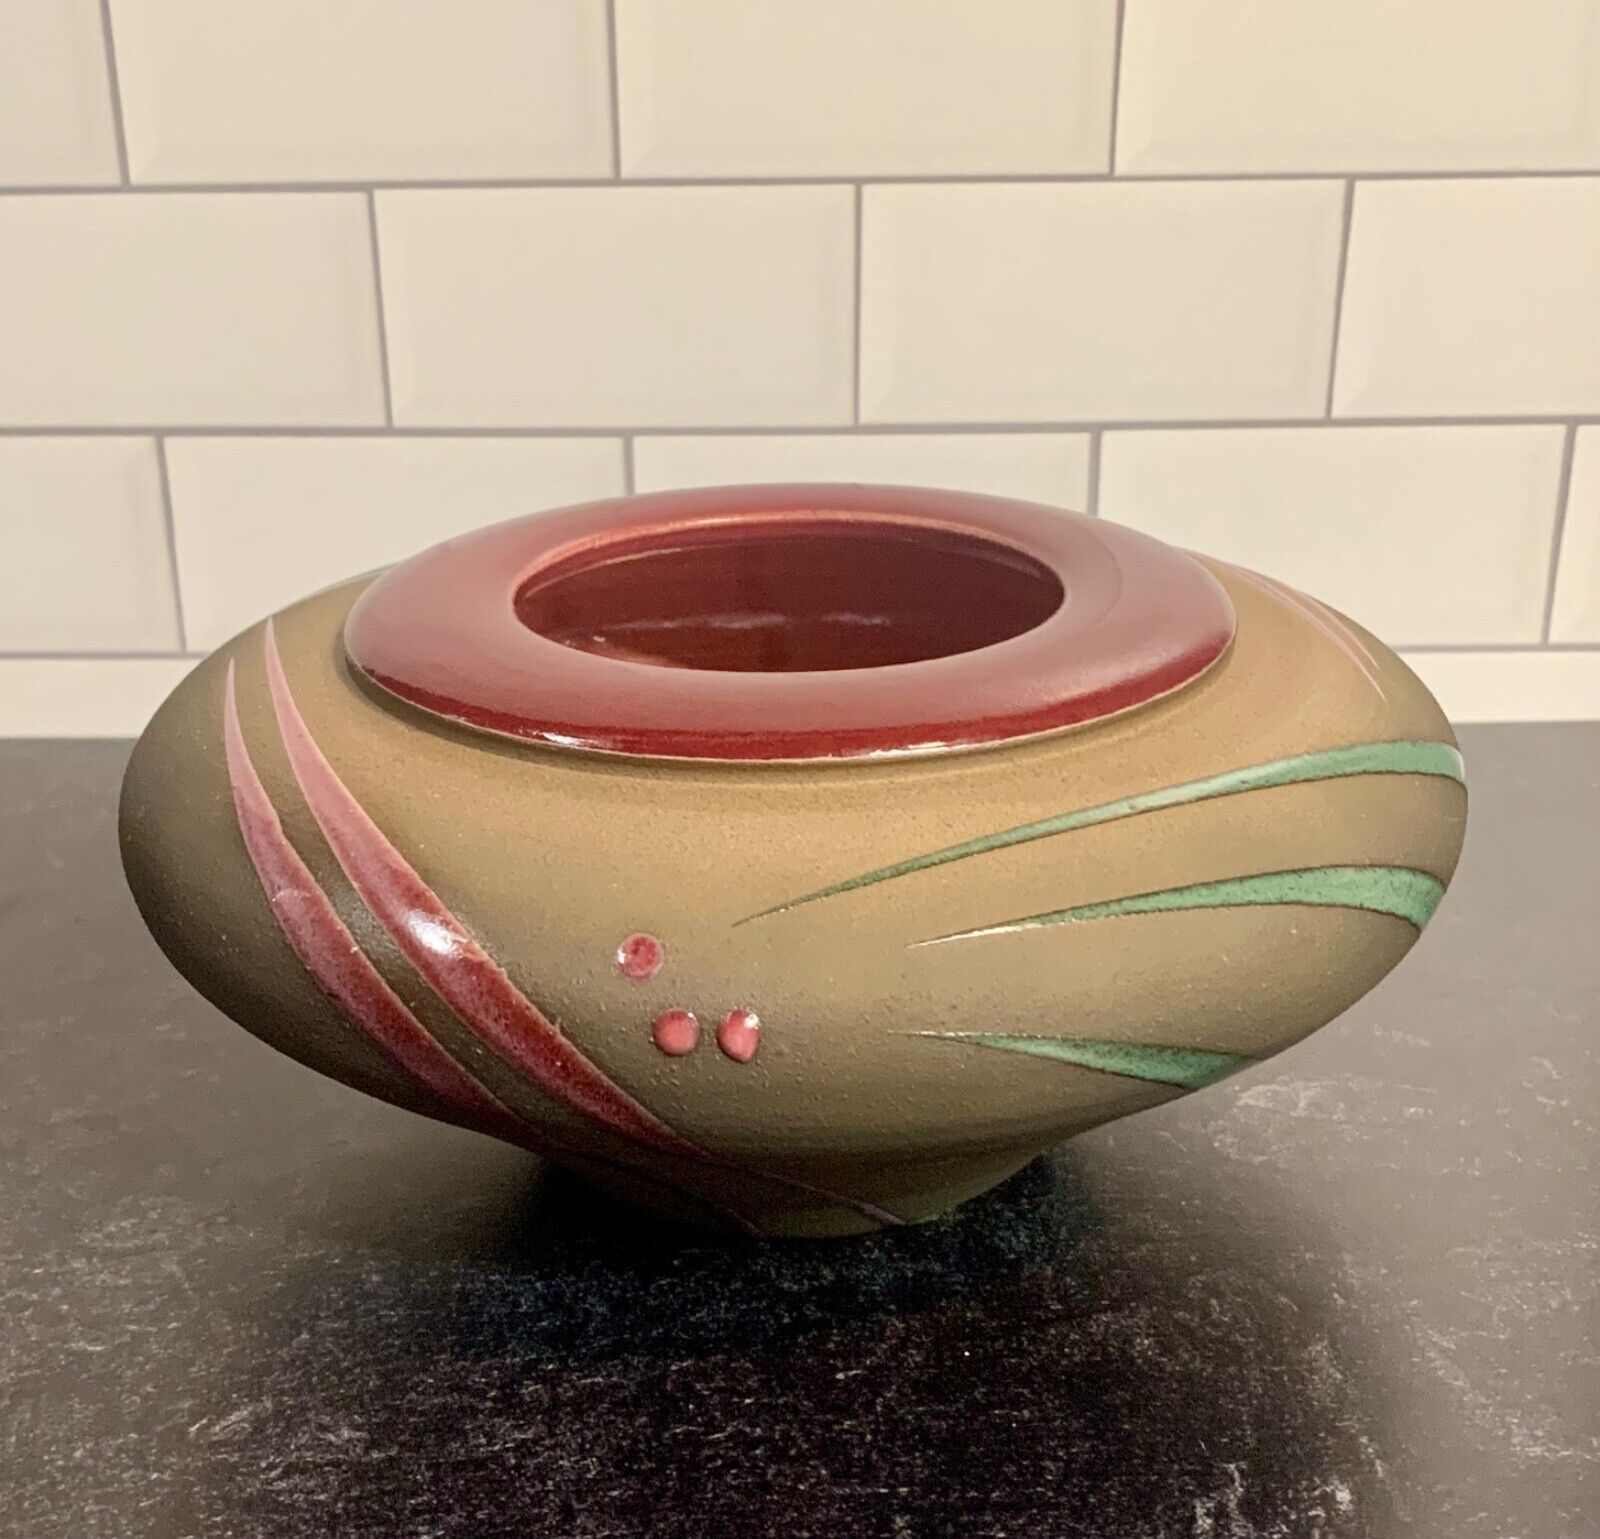 8” Rd Beautiful Studio Pottery Planter With Cranberry and Green Accents - SIGNED